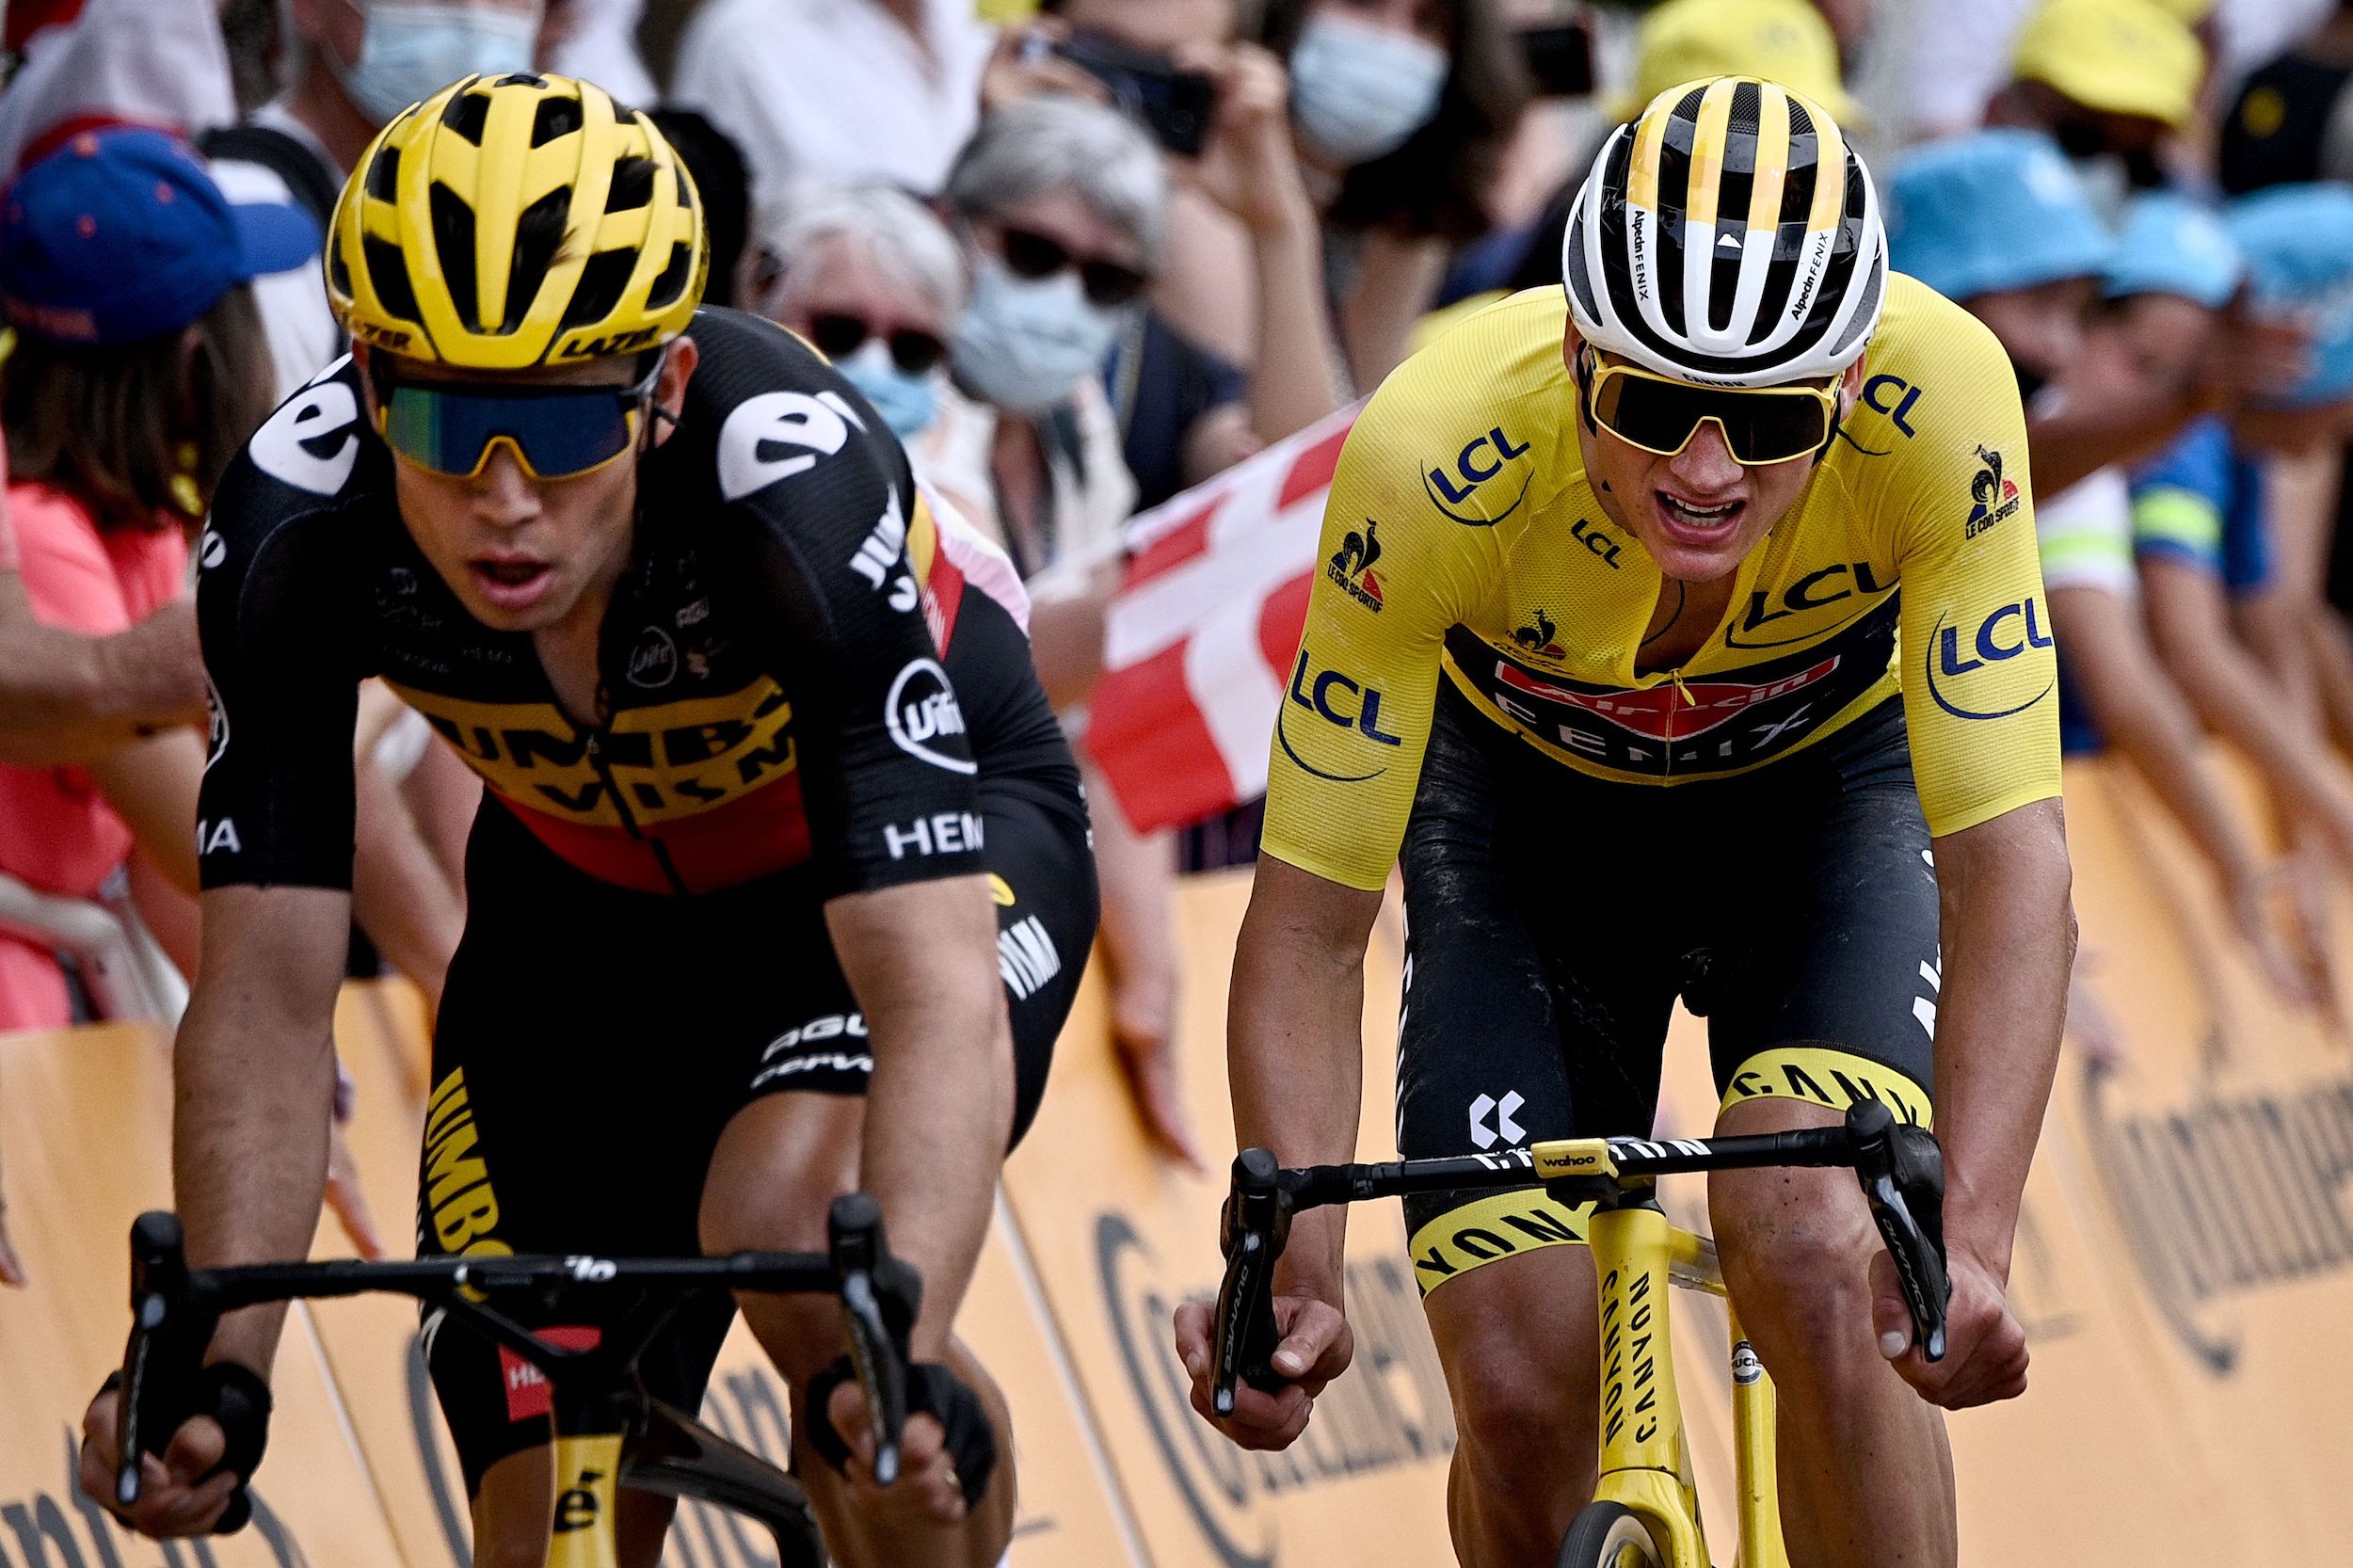 Wout van Aert and Mathieu van der Poel battling for yellow in the first week of the Tour de France 2021